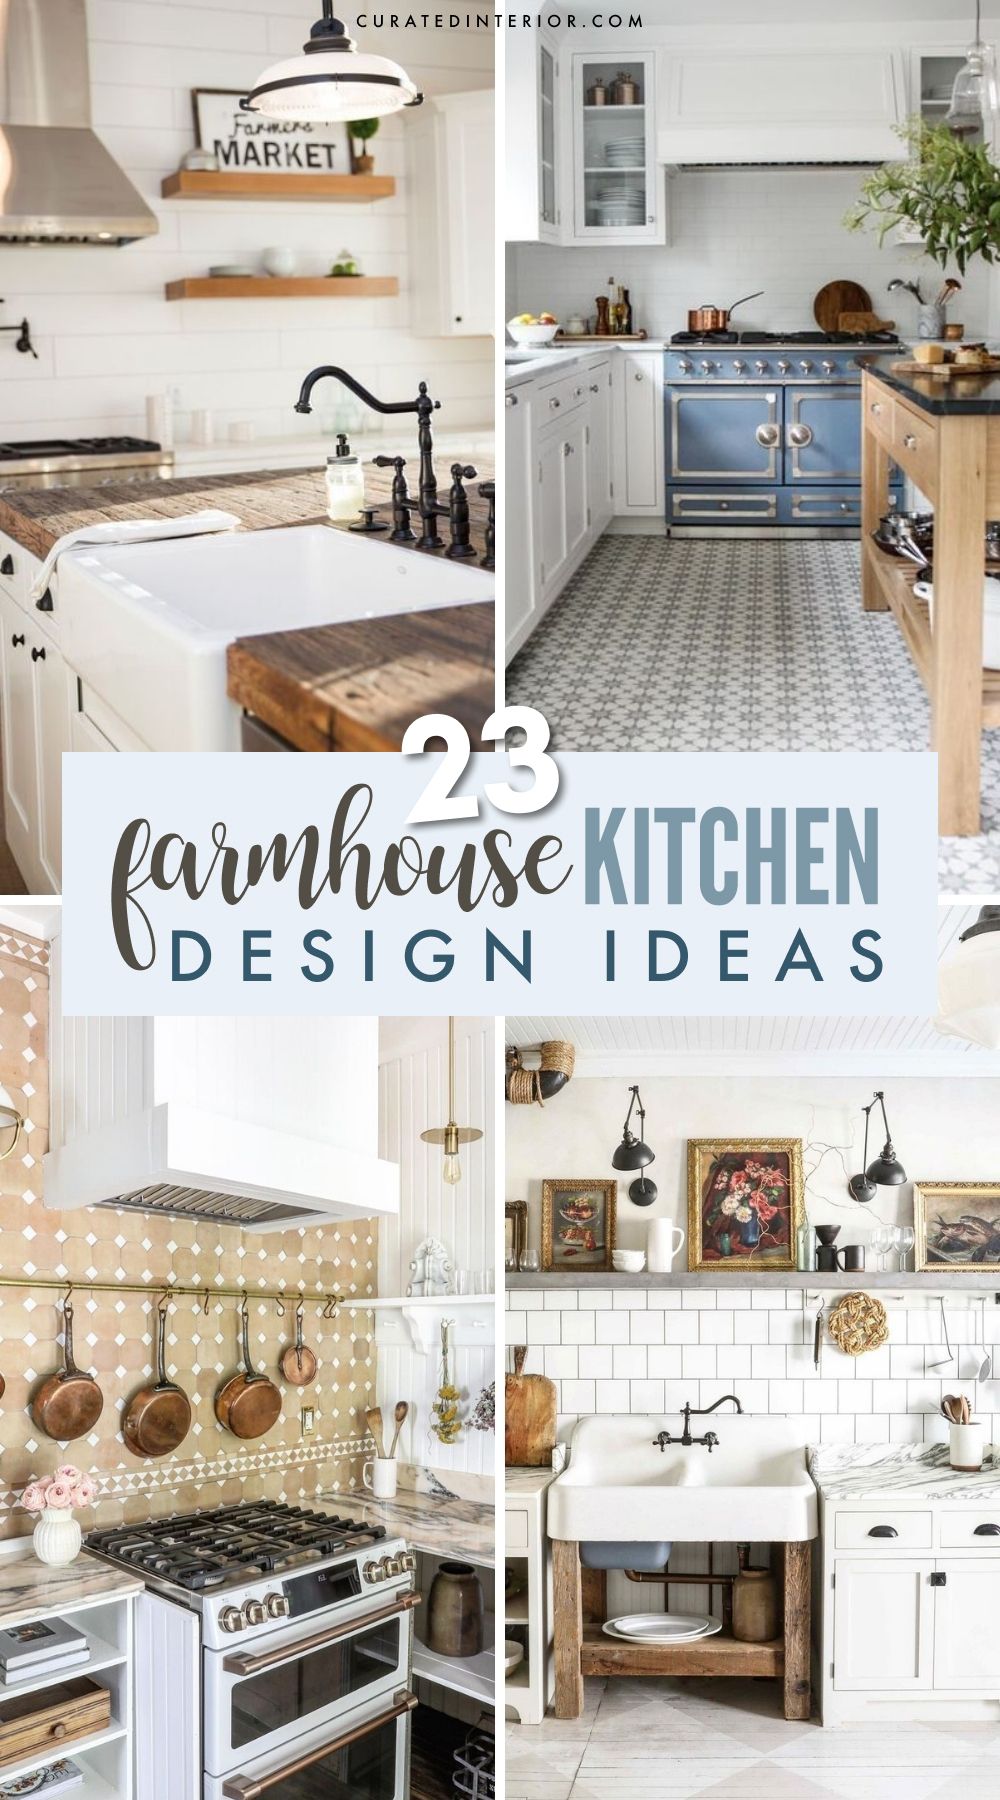 35 Cozy And Chic Farmhouse Kitchen Décor Ideas - DigsDigs